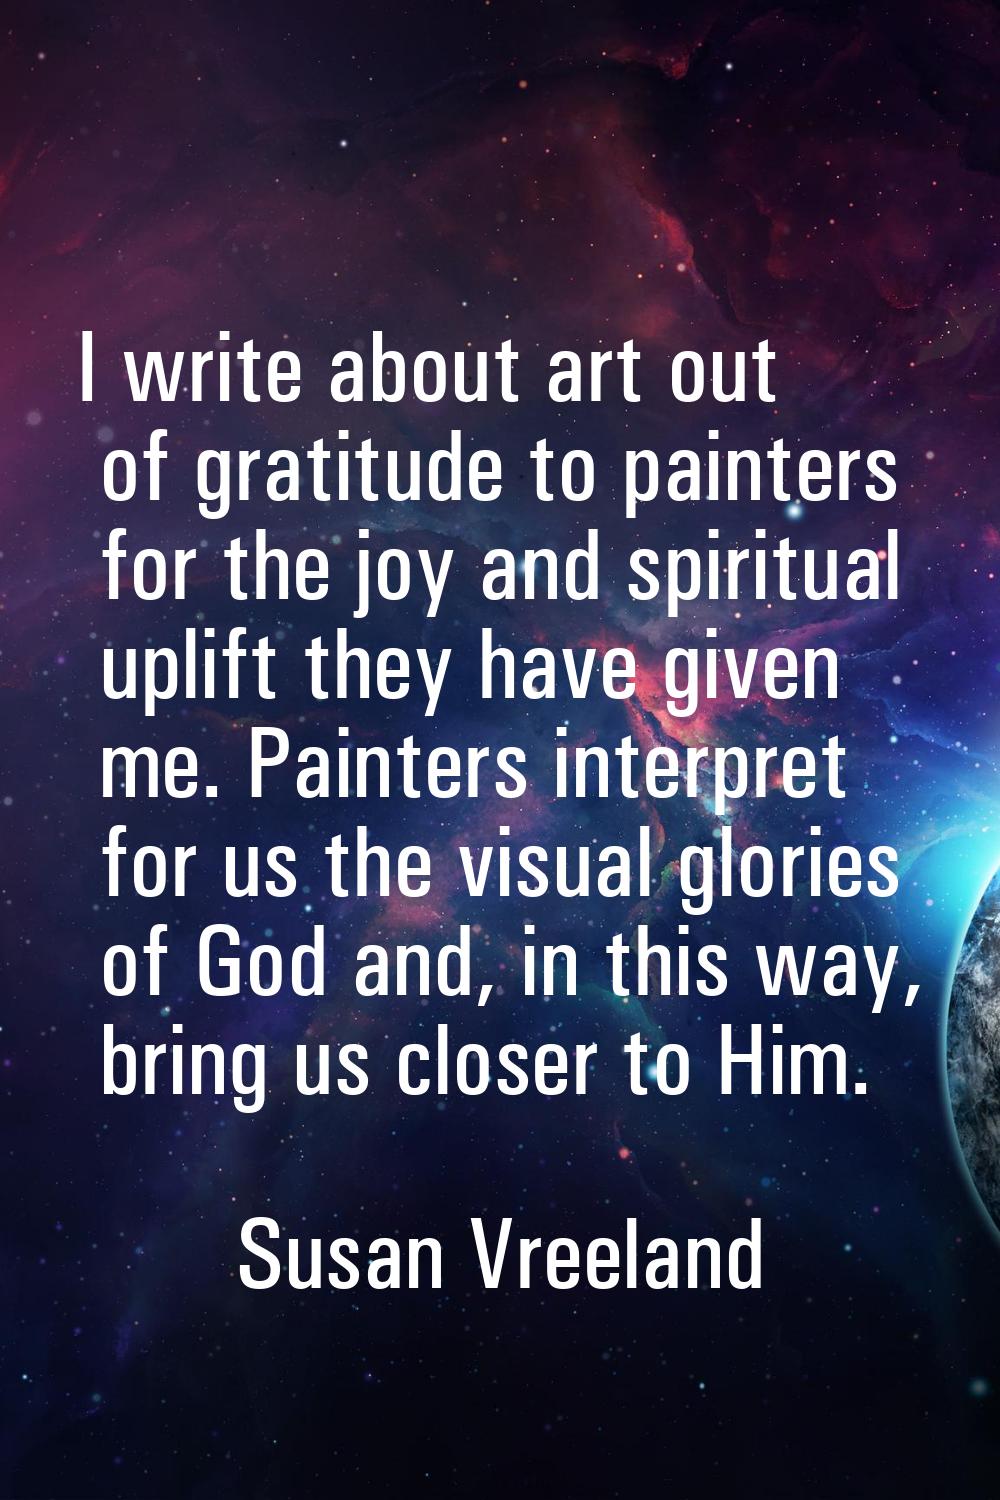 I write about art out of gratitude to painters for the joy and spiritual uplift they have given me.